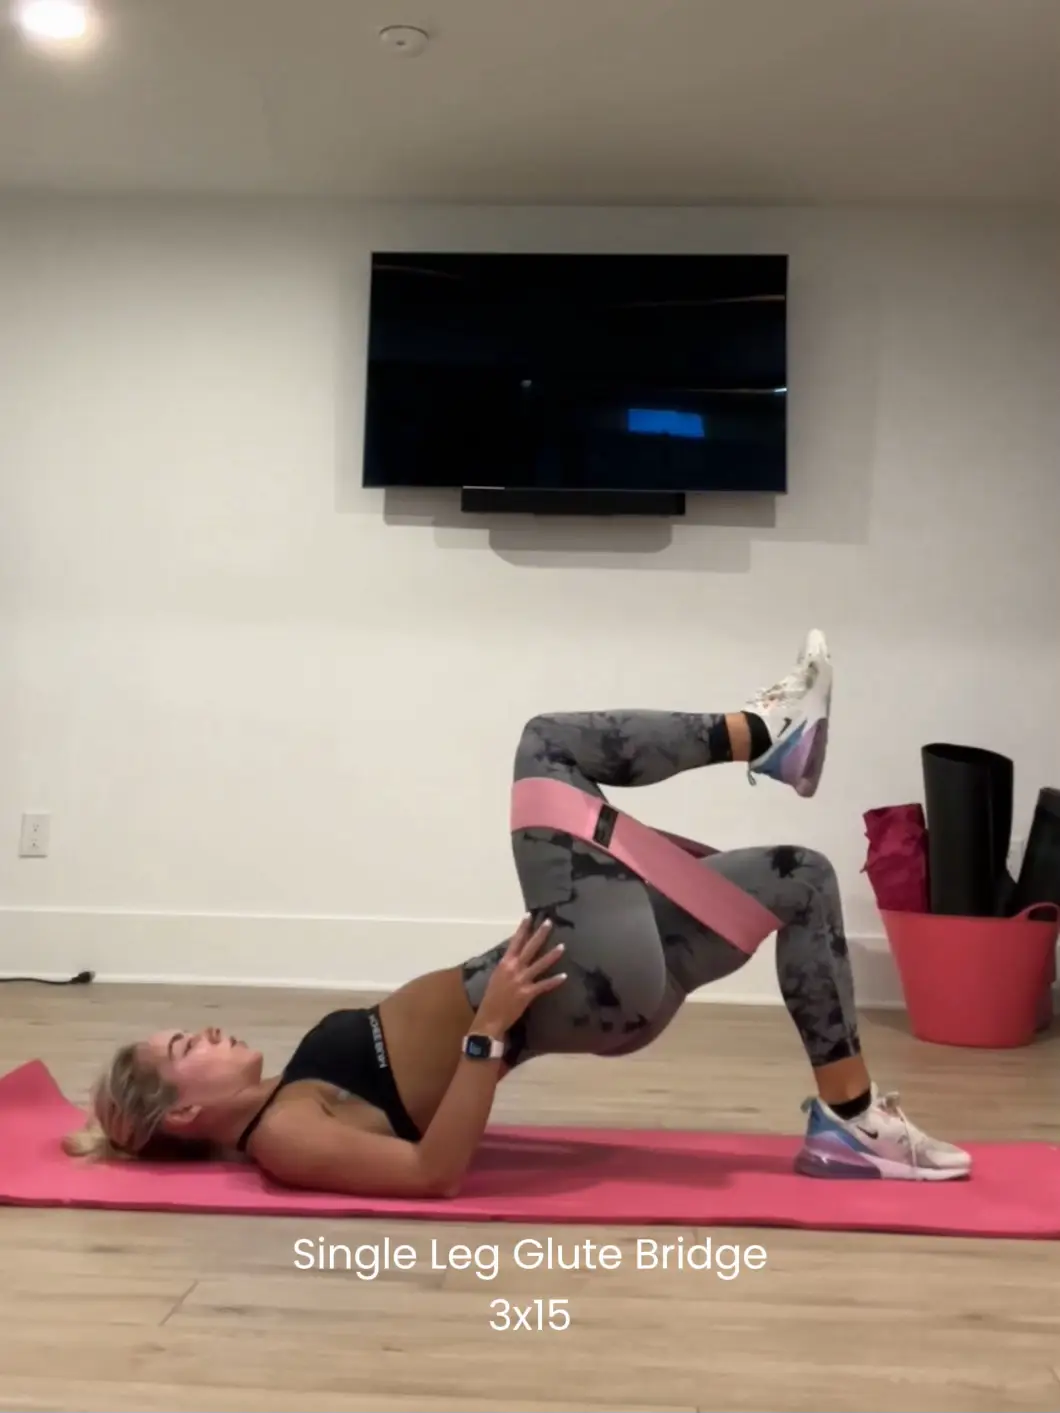 Bungee hip thrust: how to build your glutes quickly? – Fit Super-Humain